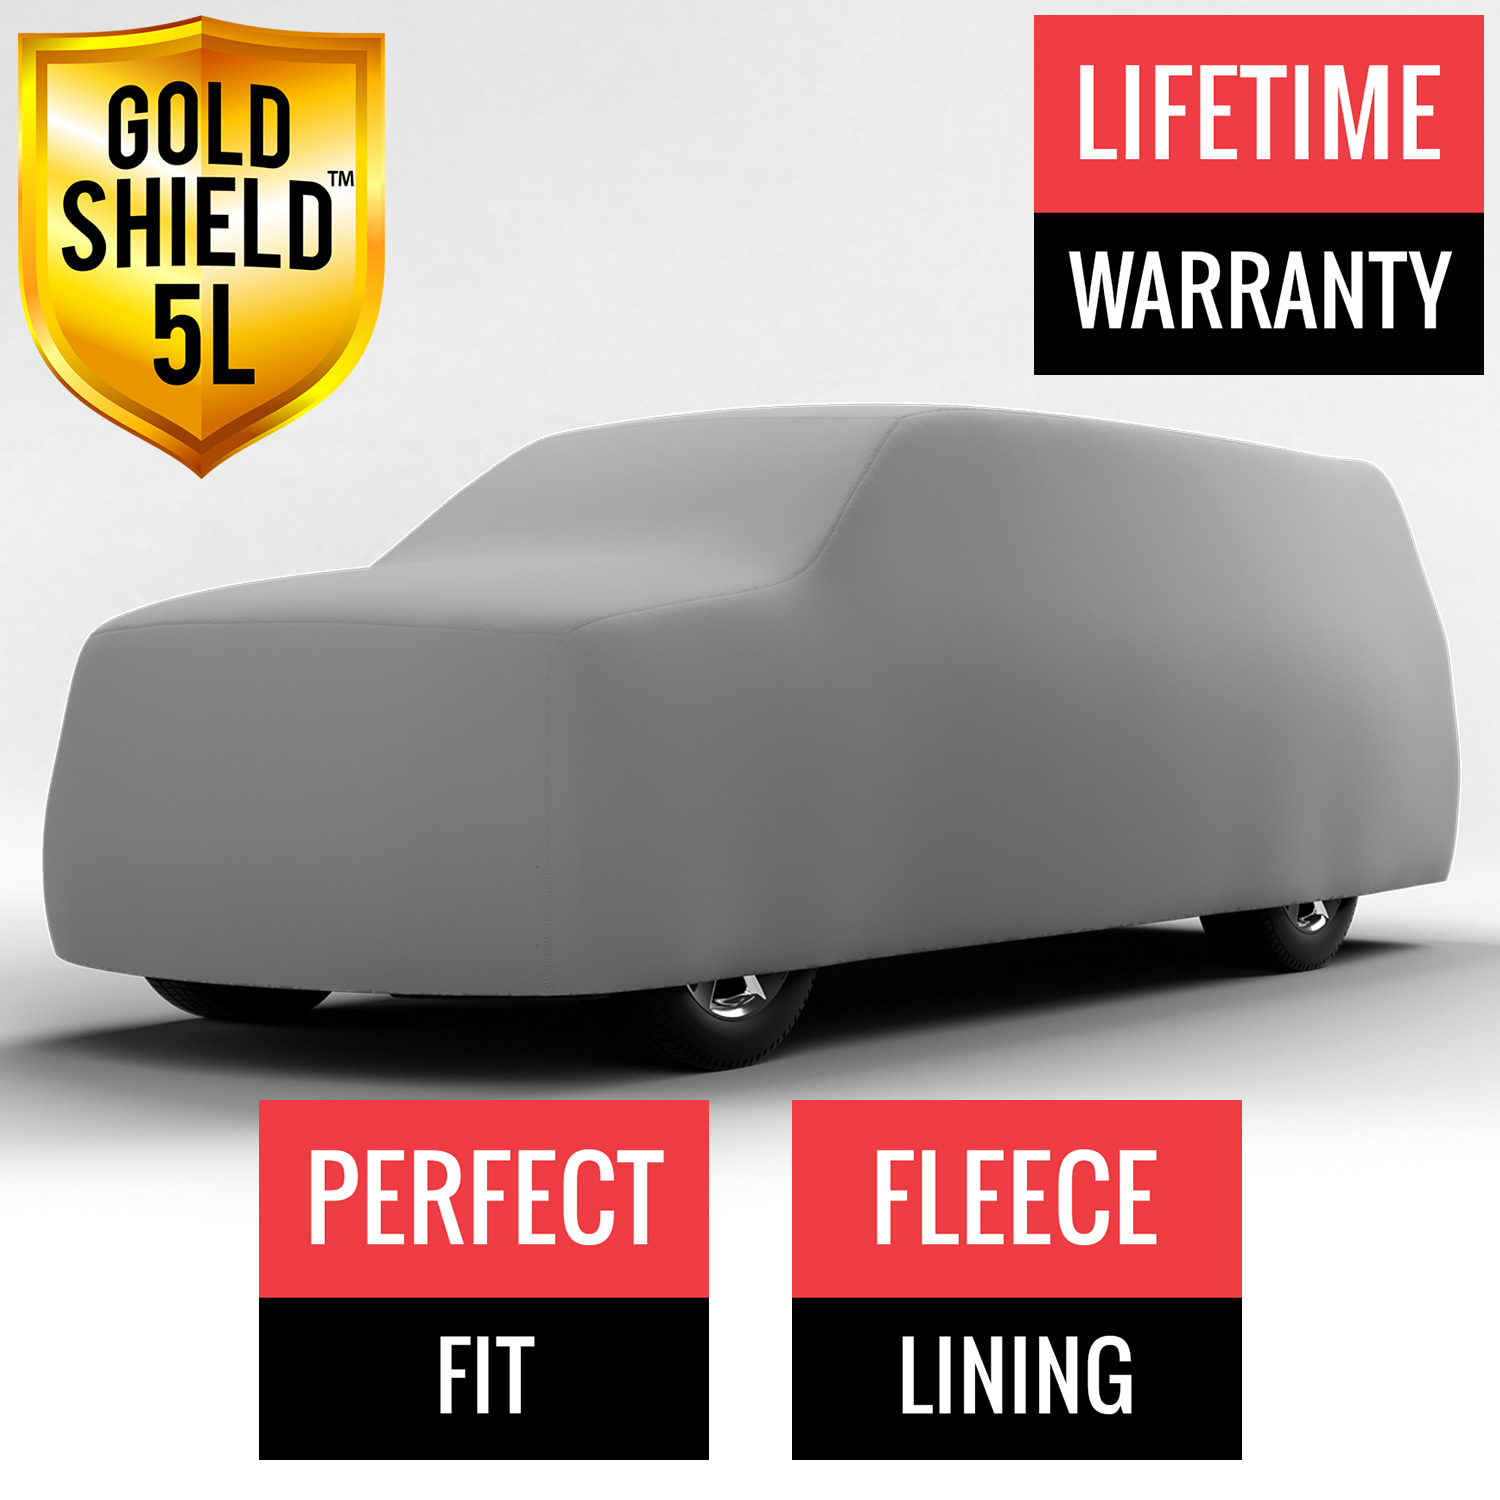 Gold Shield 5L - Car Cover for GMC C35 Pickup 1969 Extended Cab Pickup 8.0 Feet Bed with Camper Shell